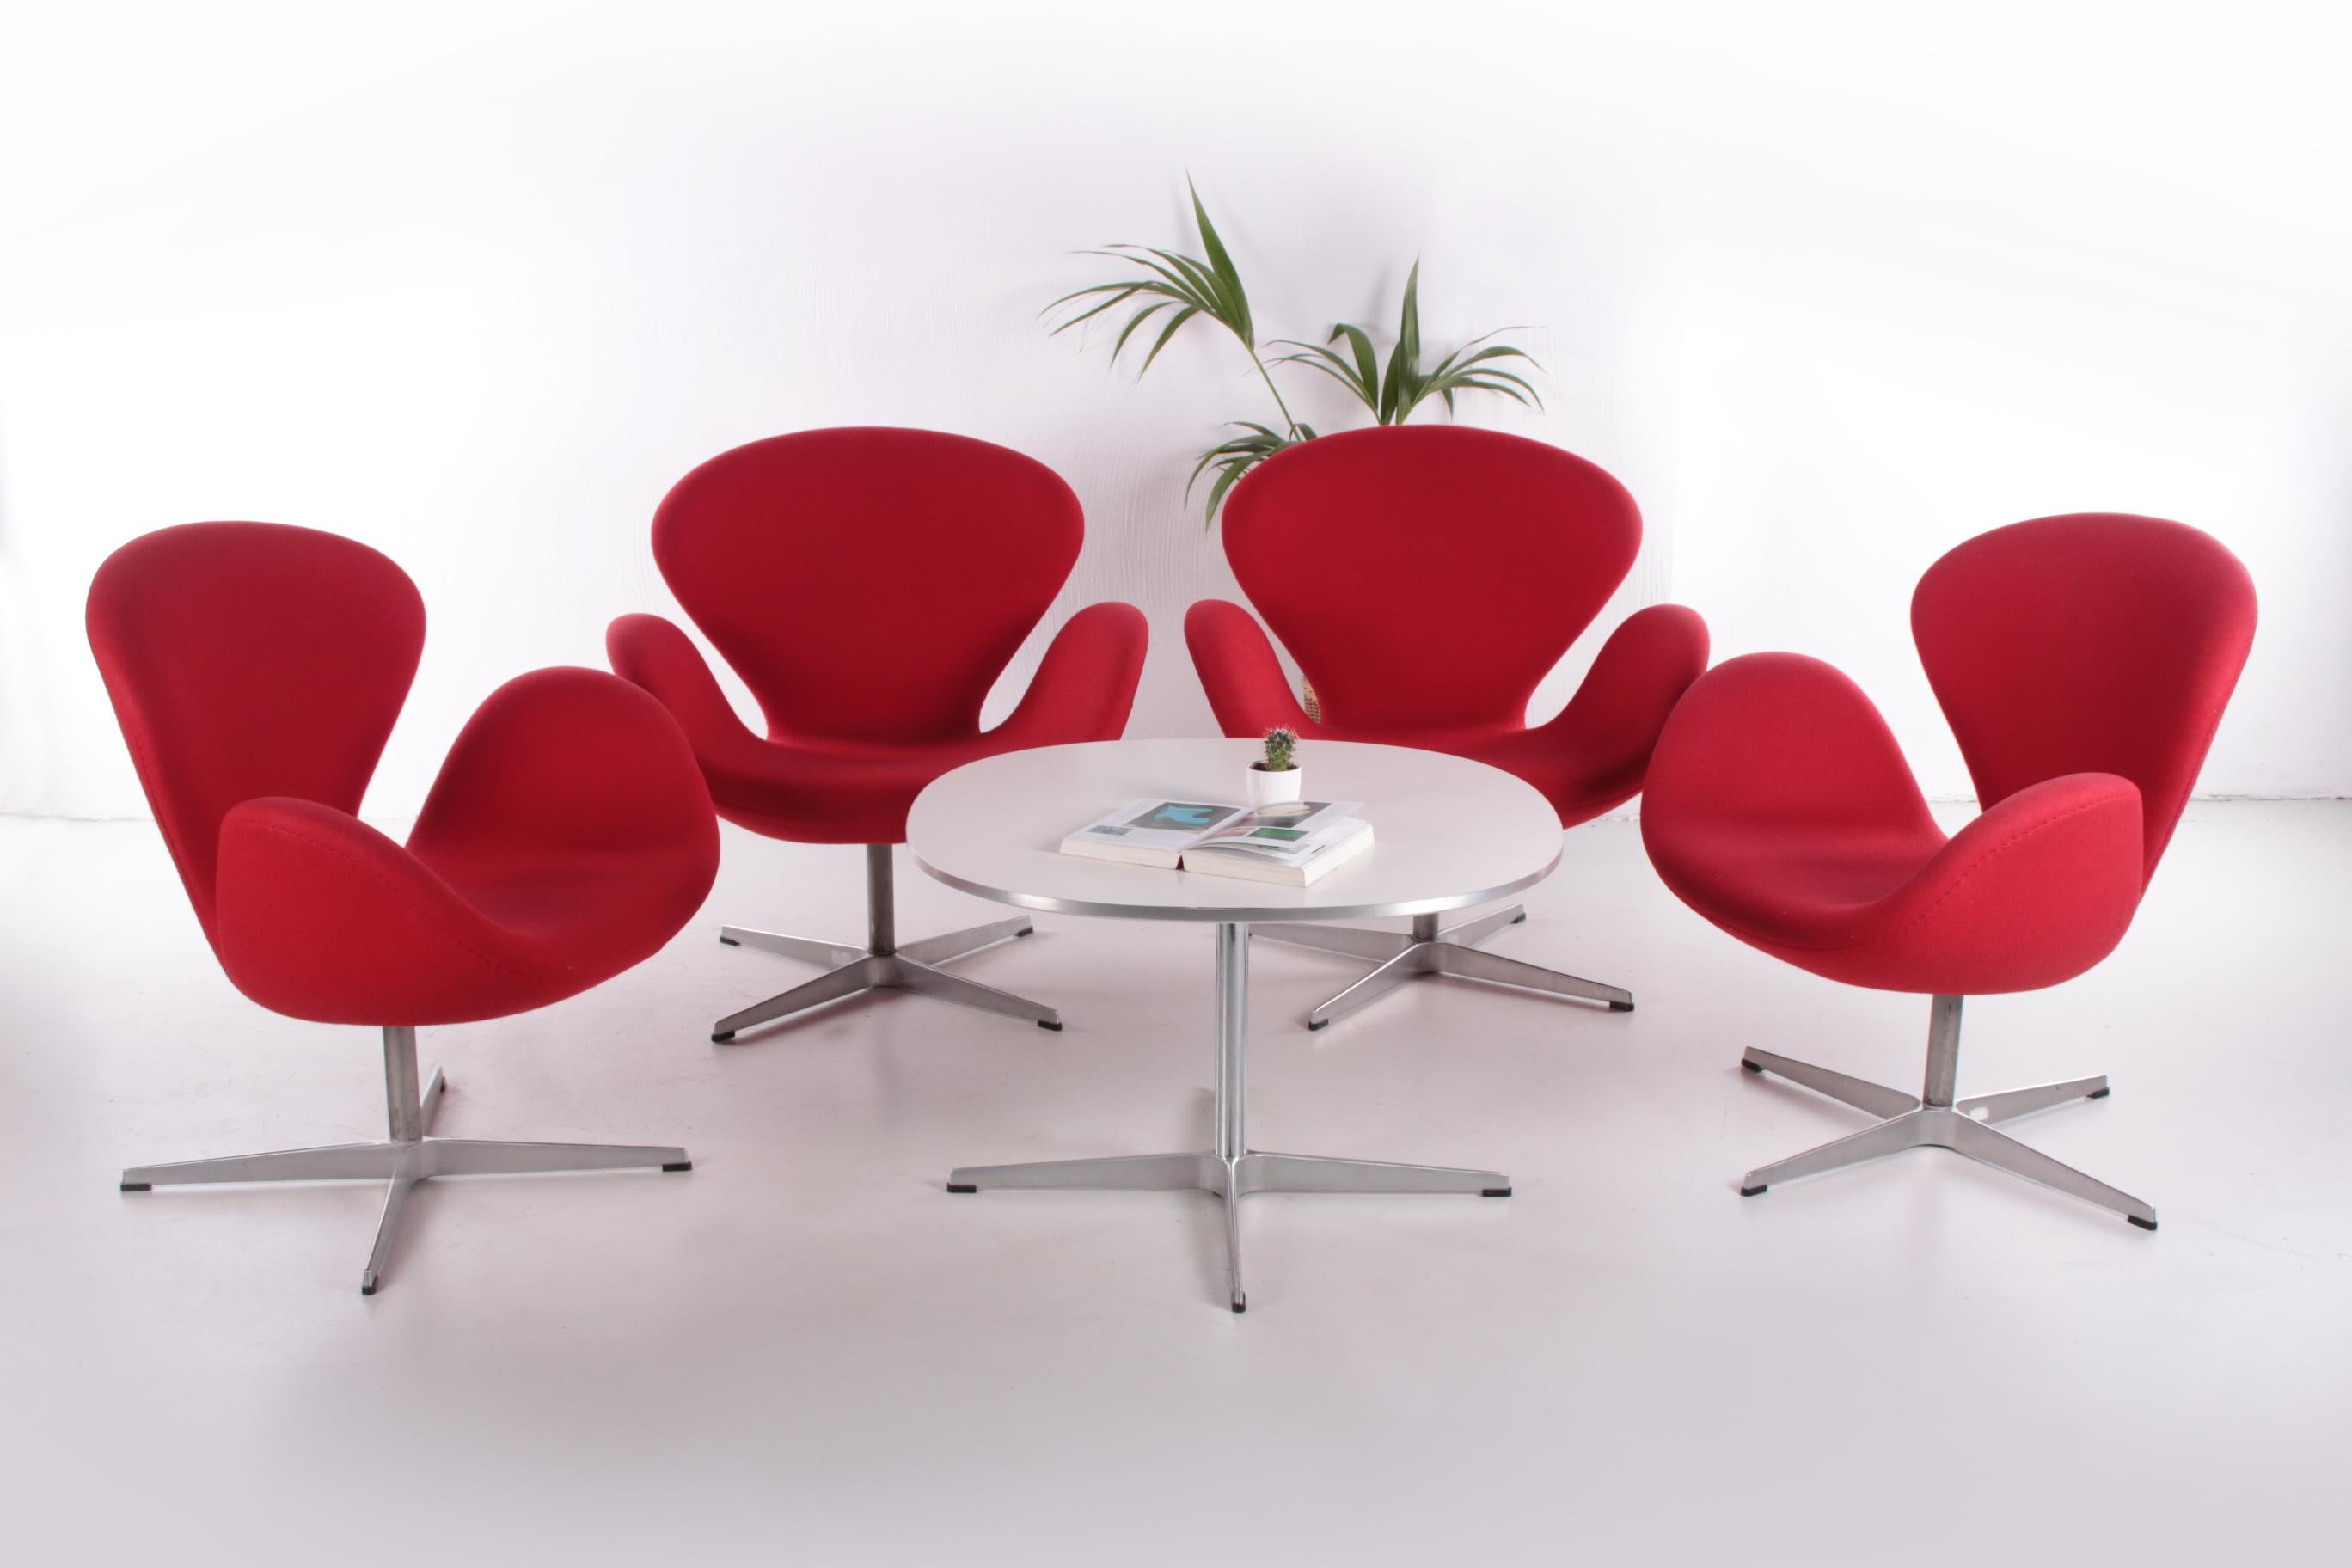 This is a beautiful set from 2001 in a more than perfect condition. Fritz Hansen Swan lounge chair designed by Arne Jacobsen in 1958. Red fabric, aluminum satin polished base.
Arne Jacobsen

Arne Jacobsen (11 February 1902 – 24 March 1971) was a